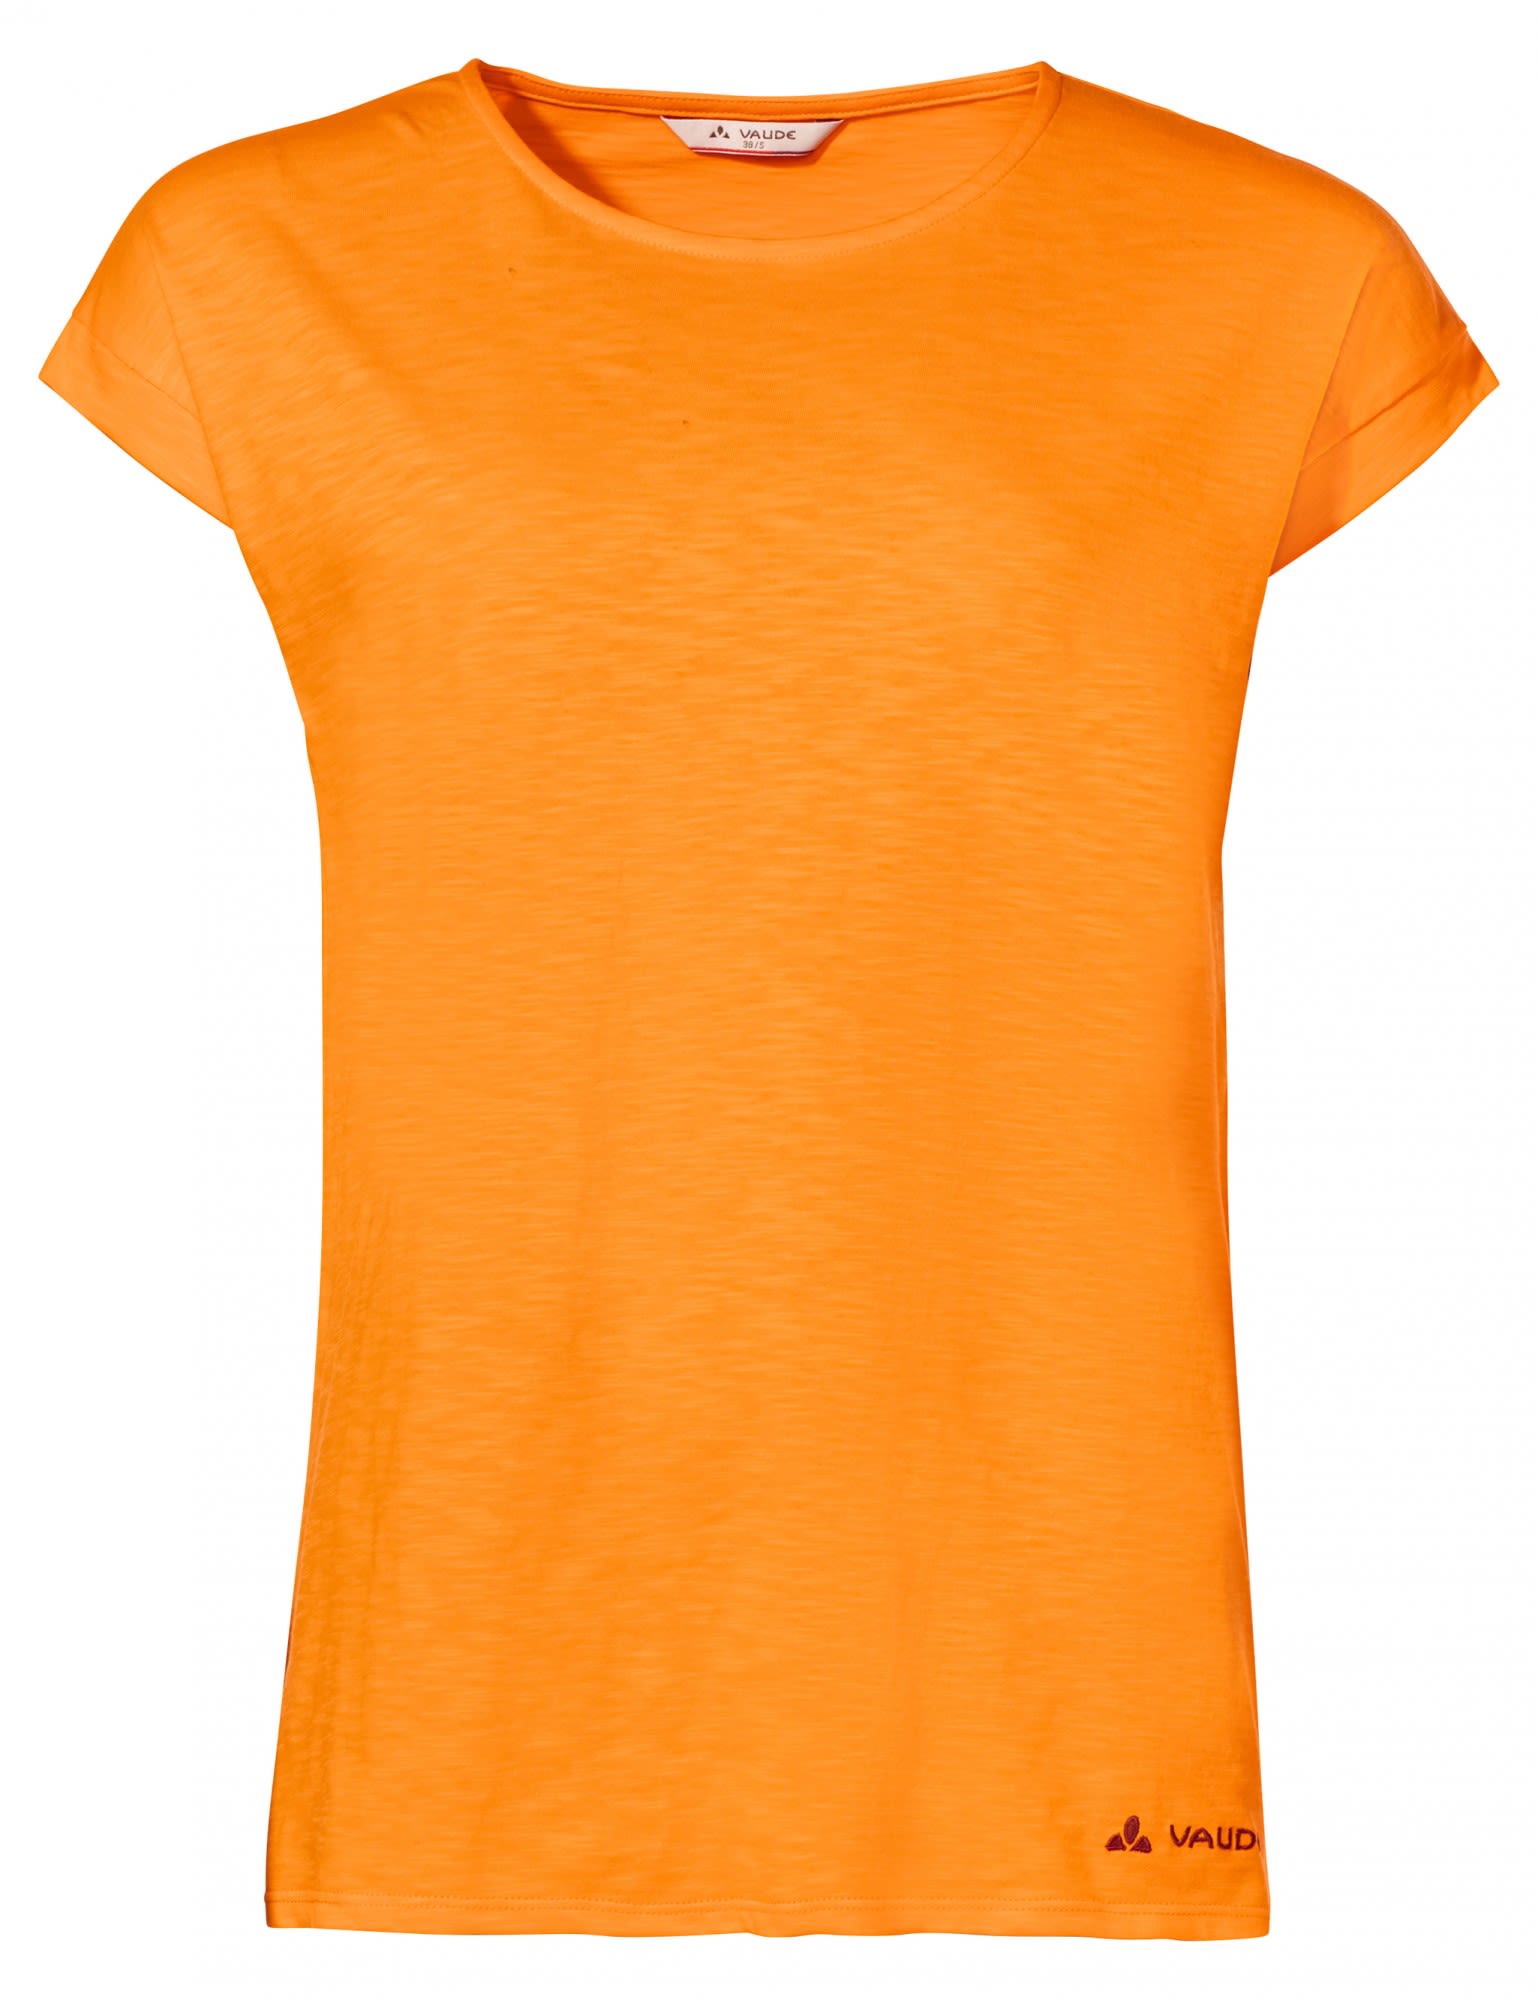 Vaude Opening Sales t-shirt. off at Coupons: organic comfortable easy-care Womens cotton 51